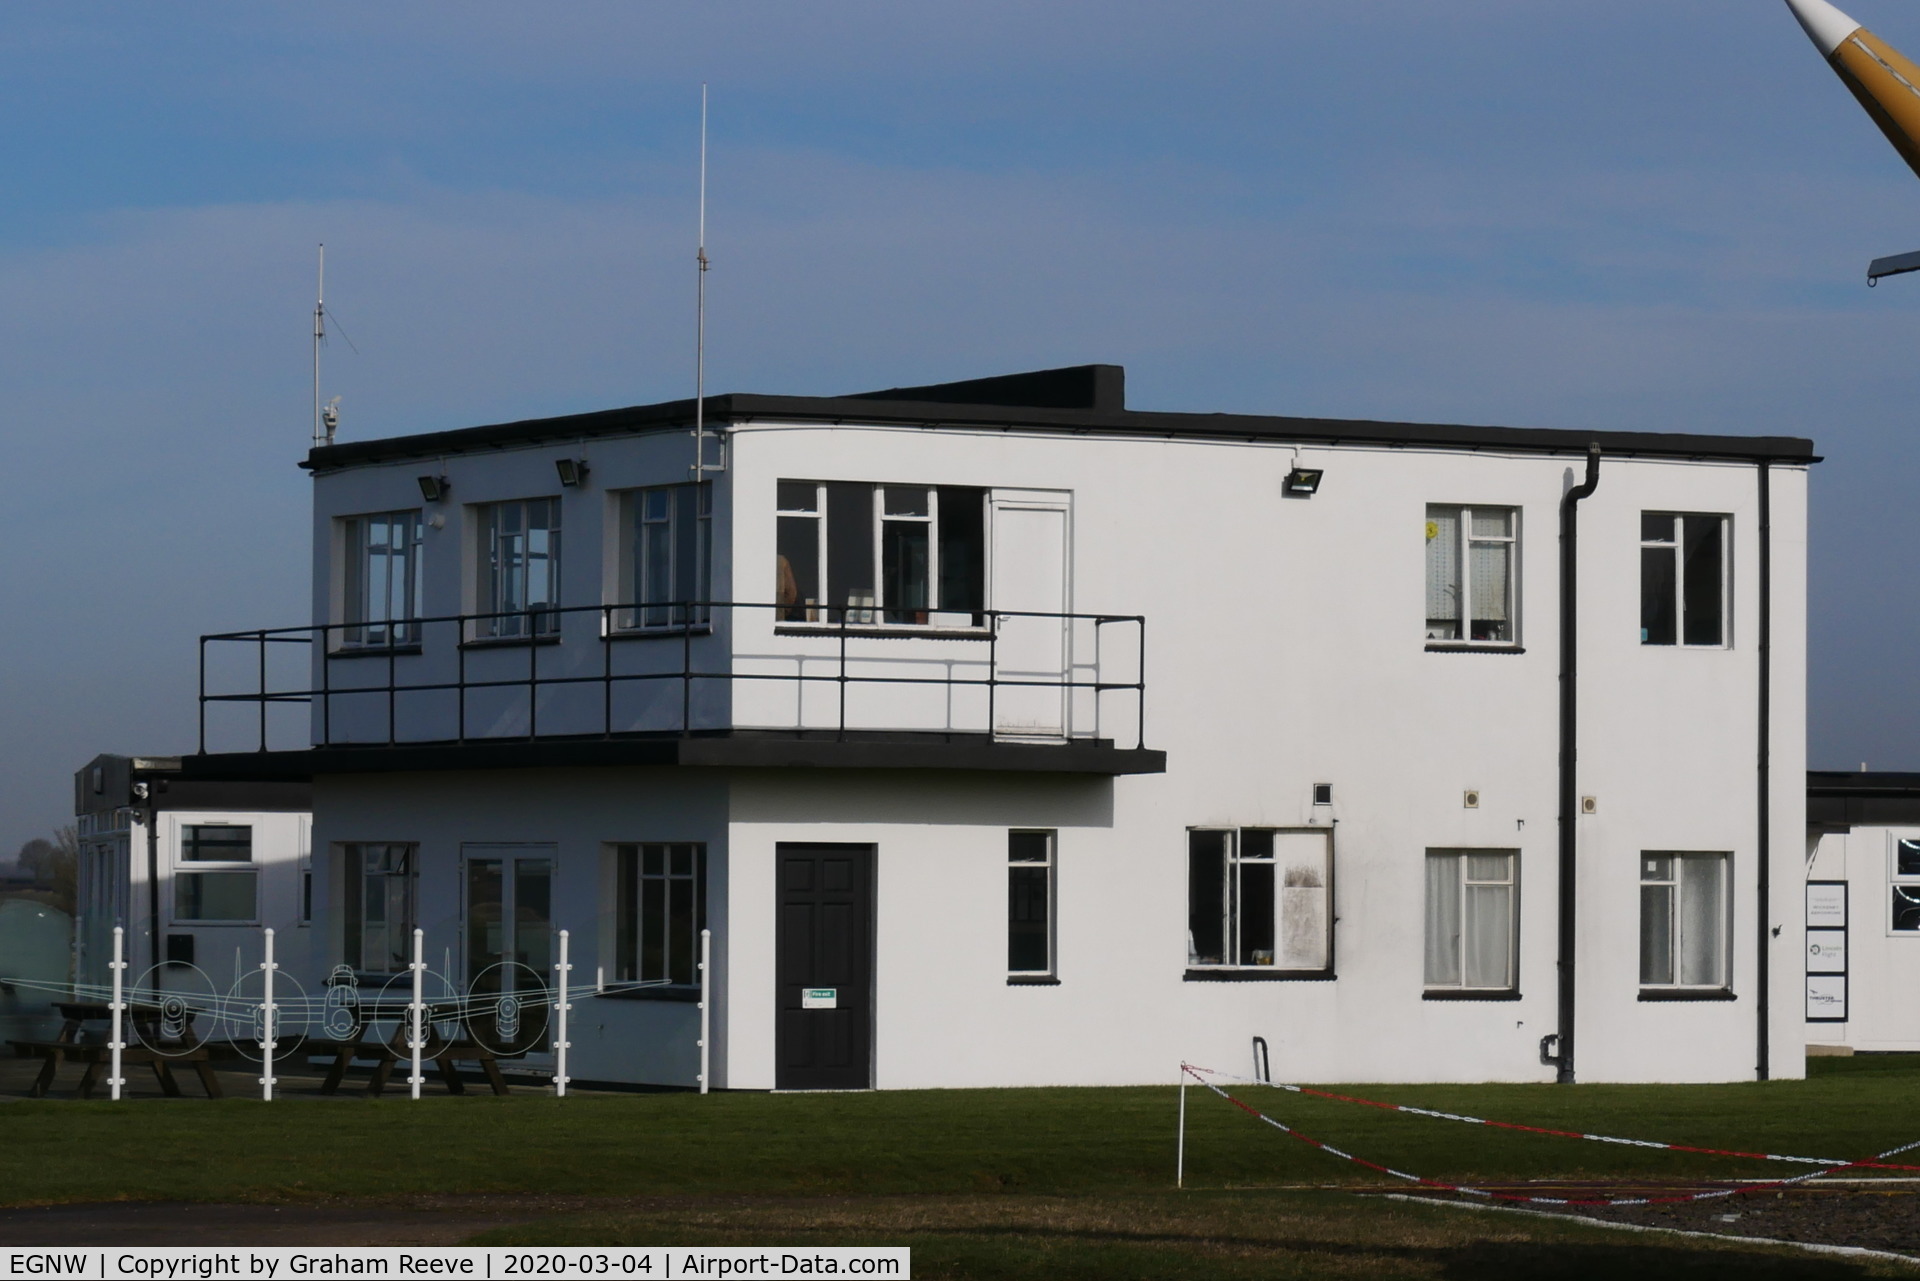 Wickenby Aerodrome Airport, Lincoln, England United Kingdom (EGNW) - Control Tower at Wickenby.